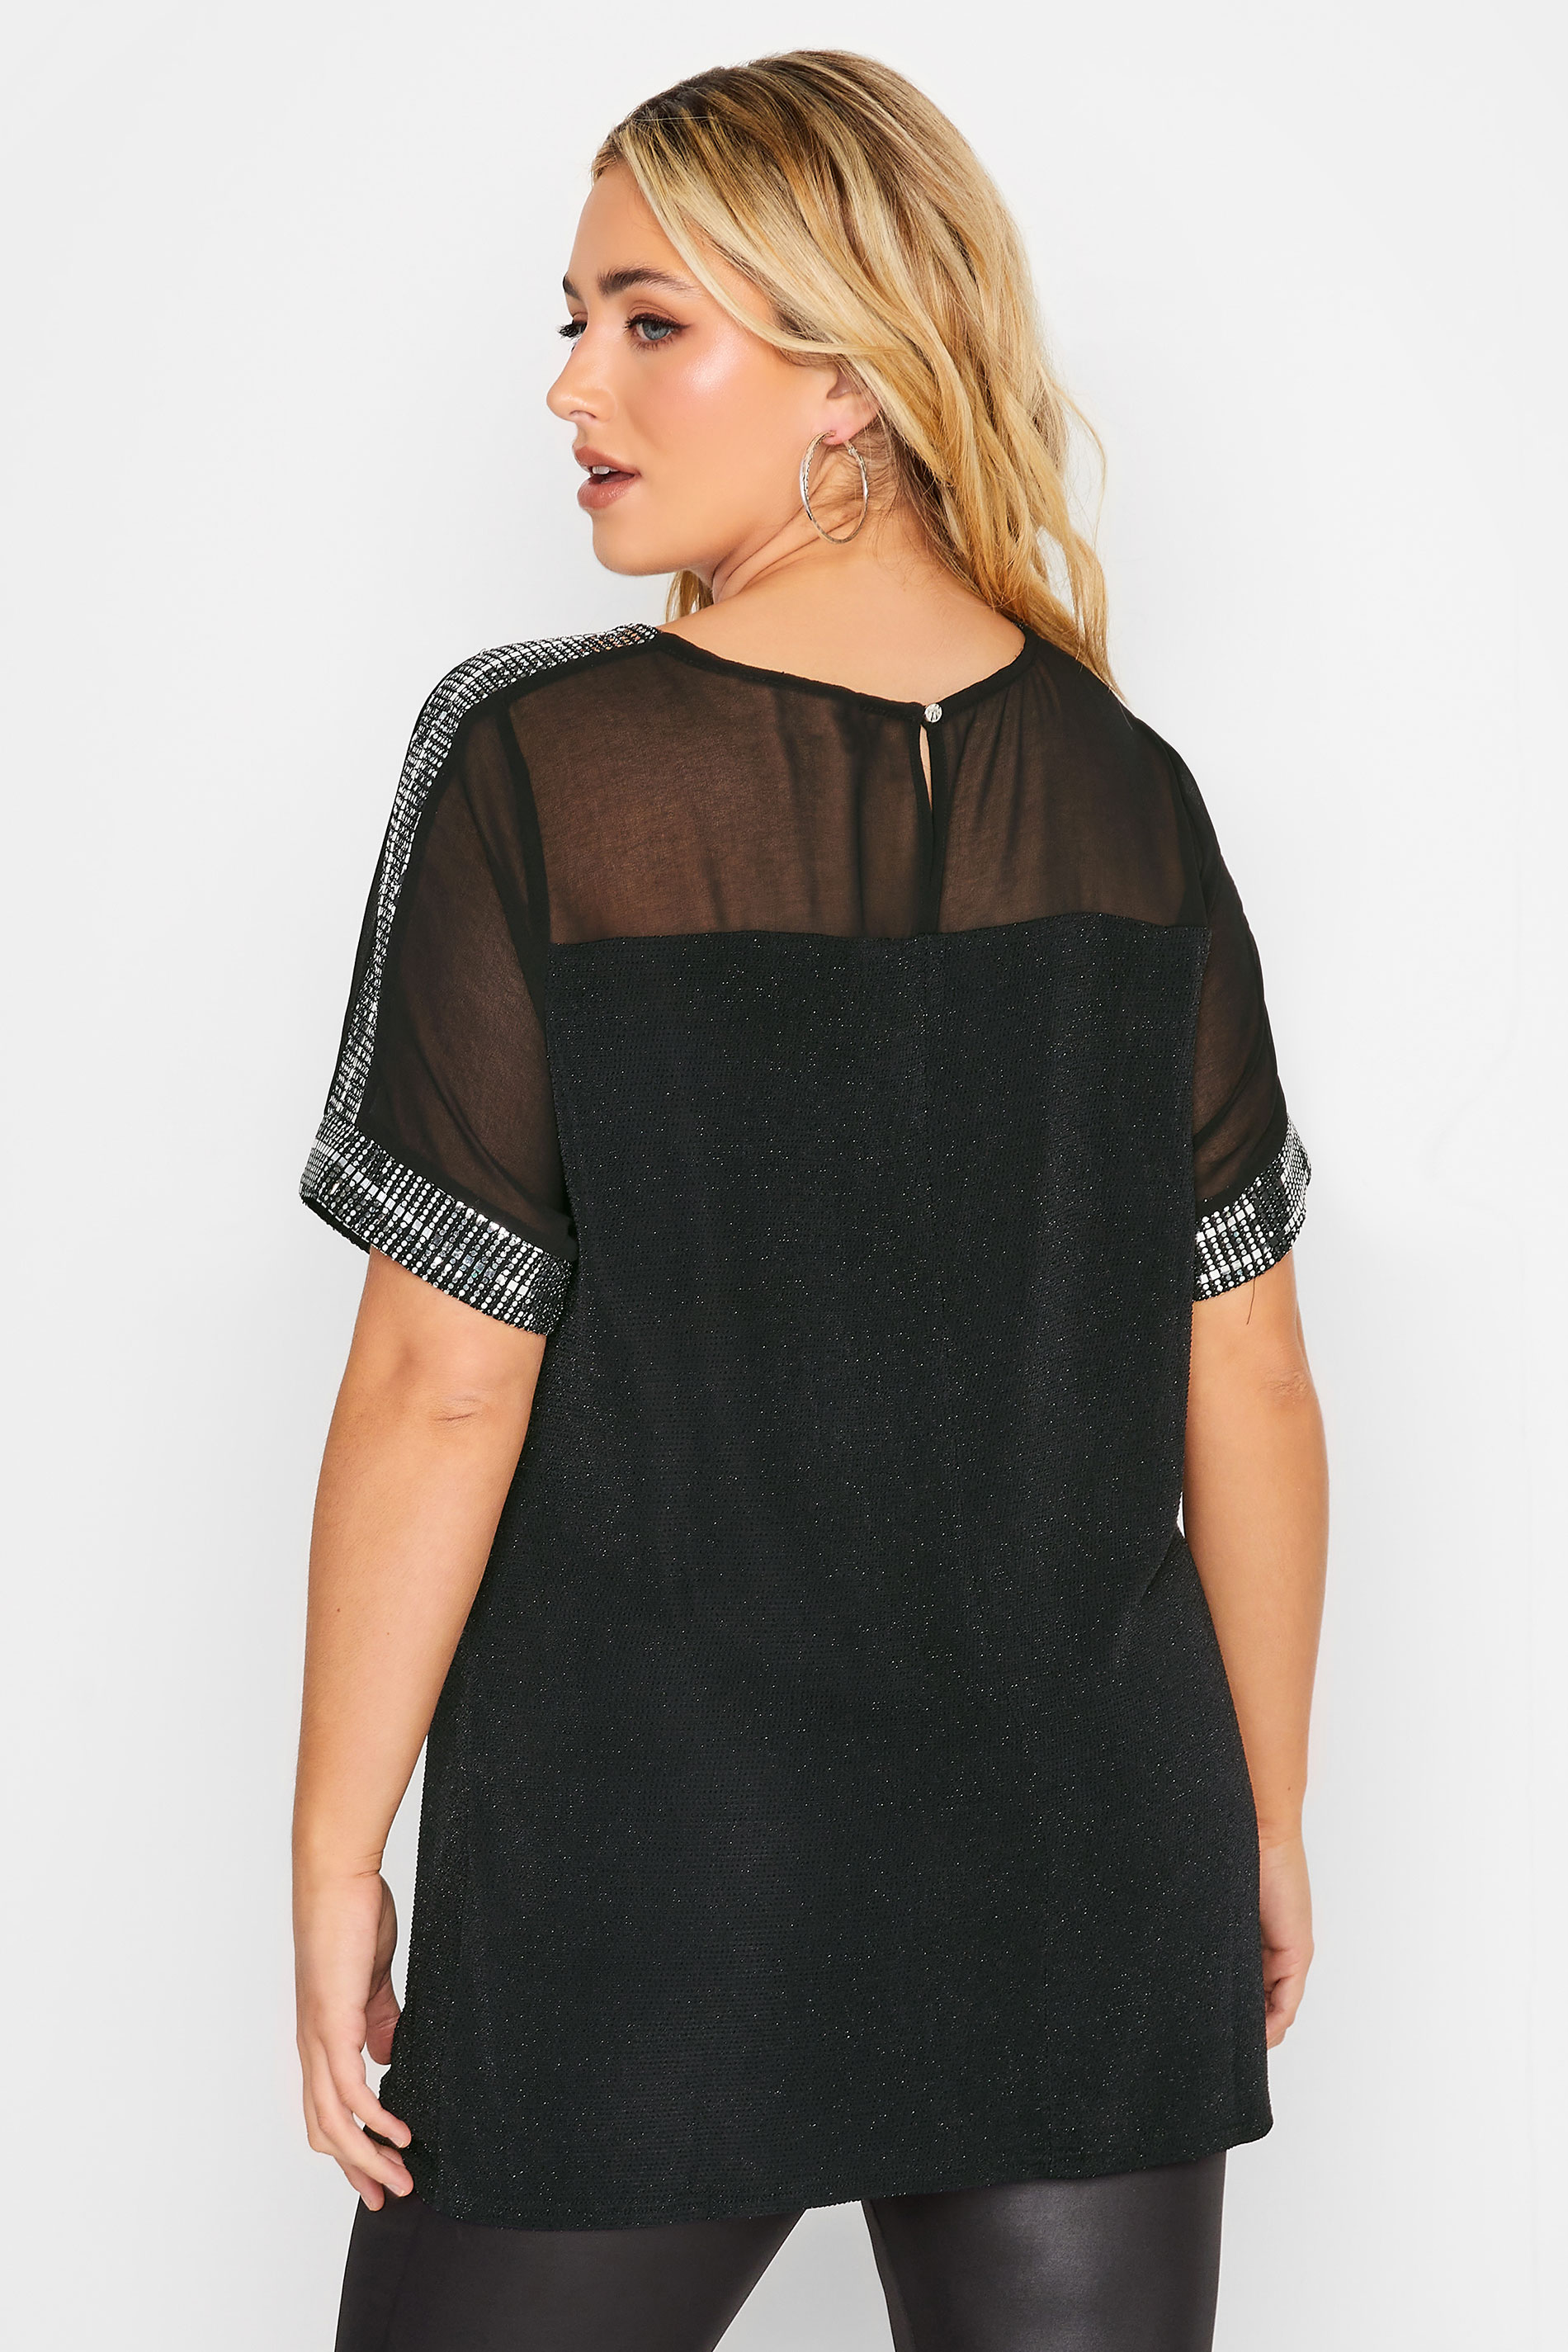 YOURS Plus Size Curve Black Chiffon Sequin Top | Yours Clothing  3